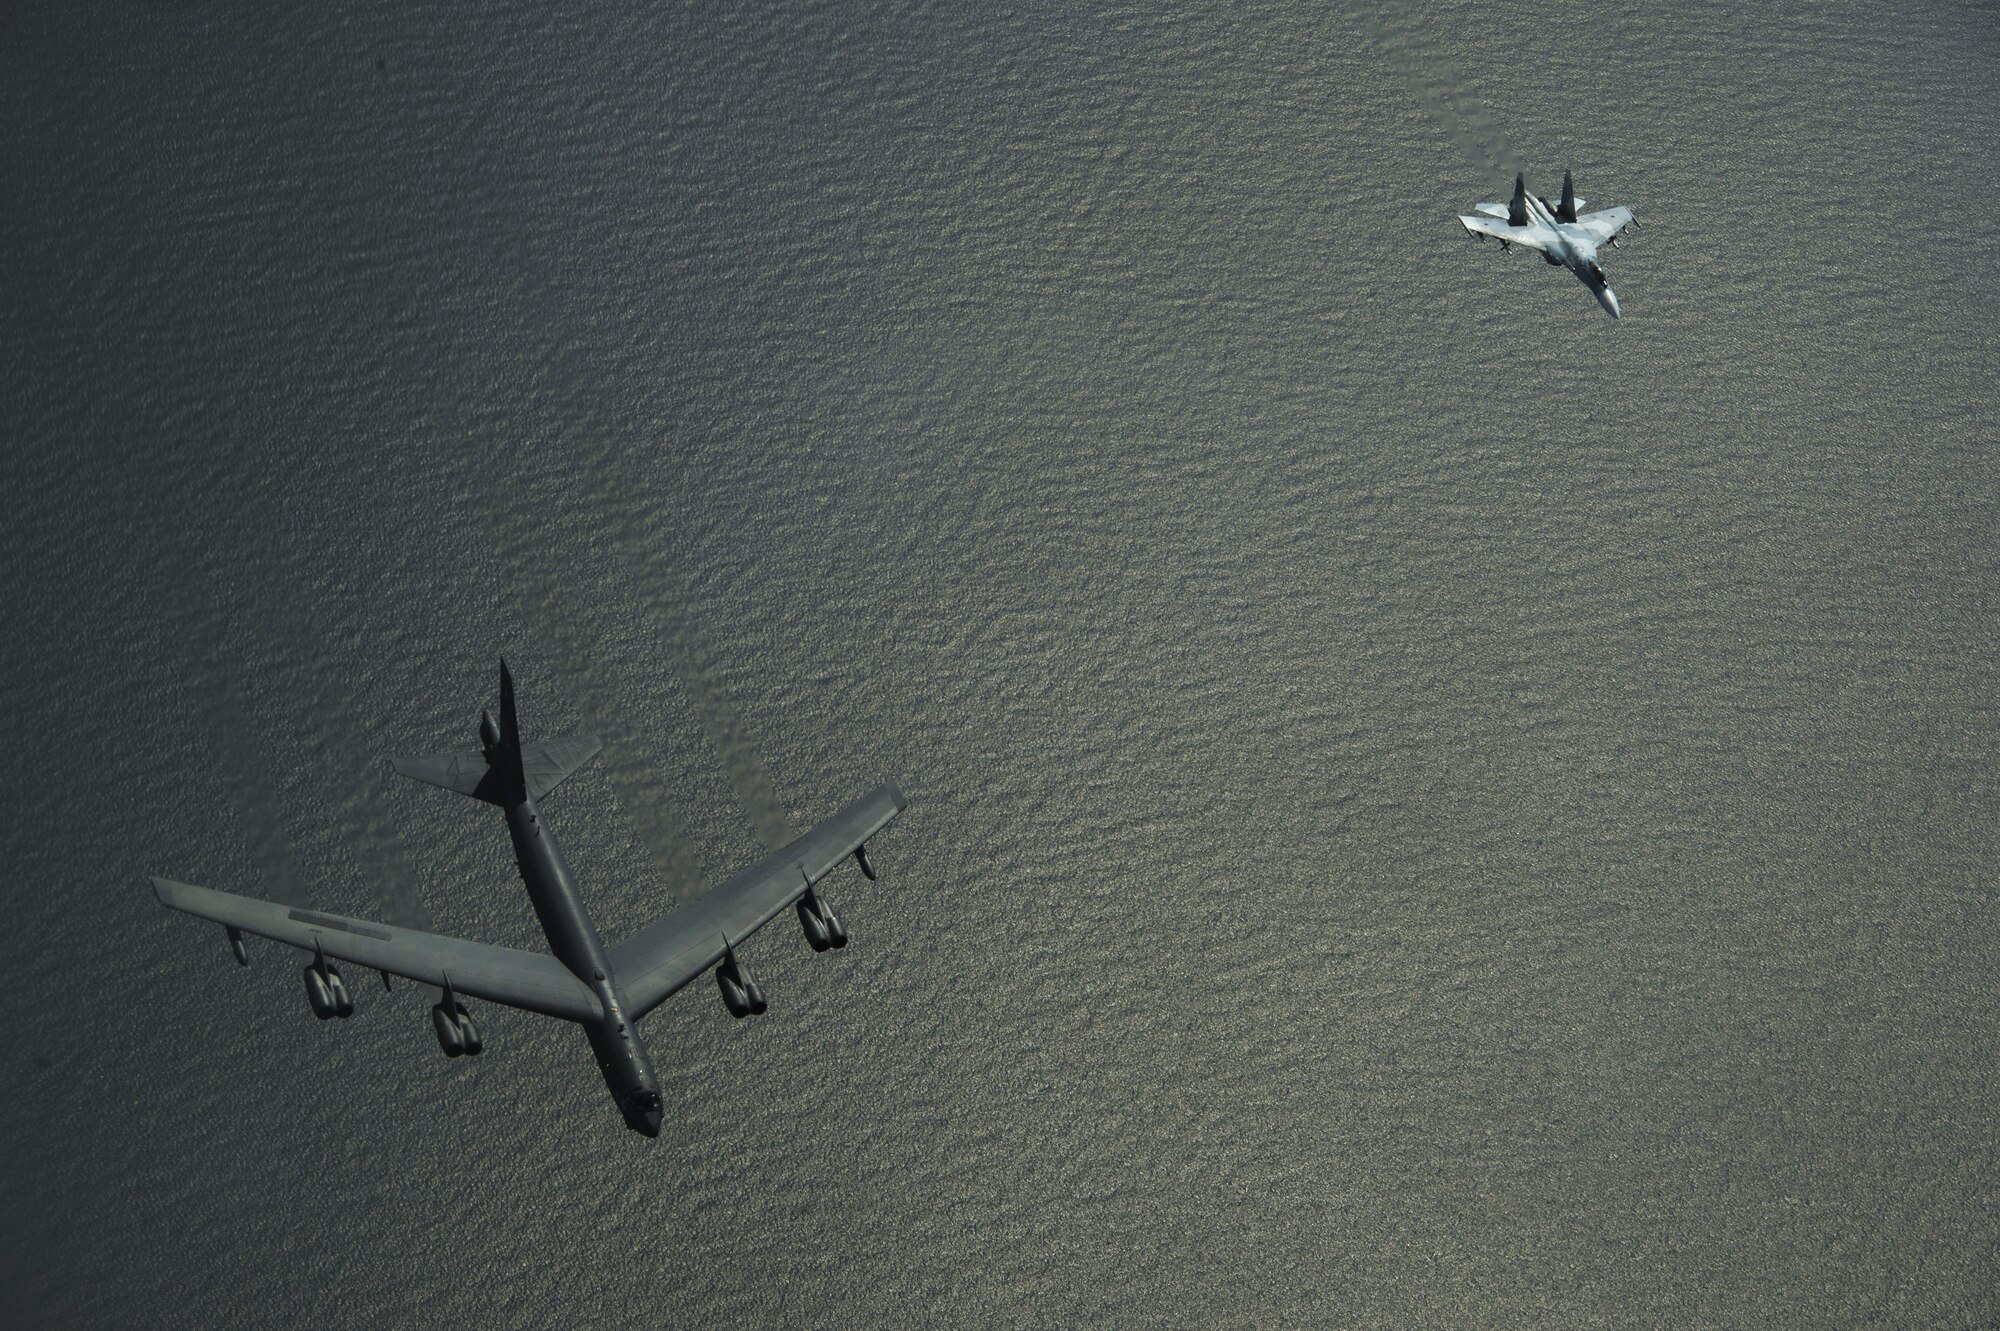 A Russian Su-27 Flanker intercepts a U.S. Air Force B-52H Stratofortress, while participating in Baltic Operations over the Baltic Sea, June 9, 2017. The exercise is designed to enhance flexibility and interoperability, to strengthen combined response capabilities, as well as demonstrate resolve among allied and partner nations forces to ensure stability in, and defend, the Baltic Sea region. Flight intercepts are regular occurrences, and the vast majority are conducted in a safe and professional manner. (U.S. Air Force photo/Staff Sgt. Jonathan Snyder)